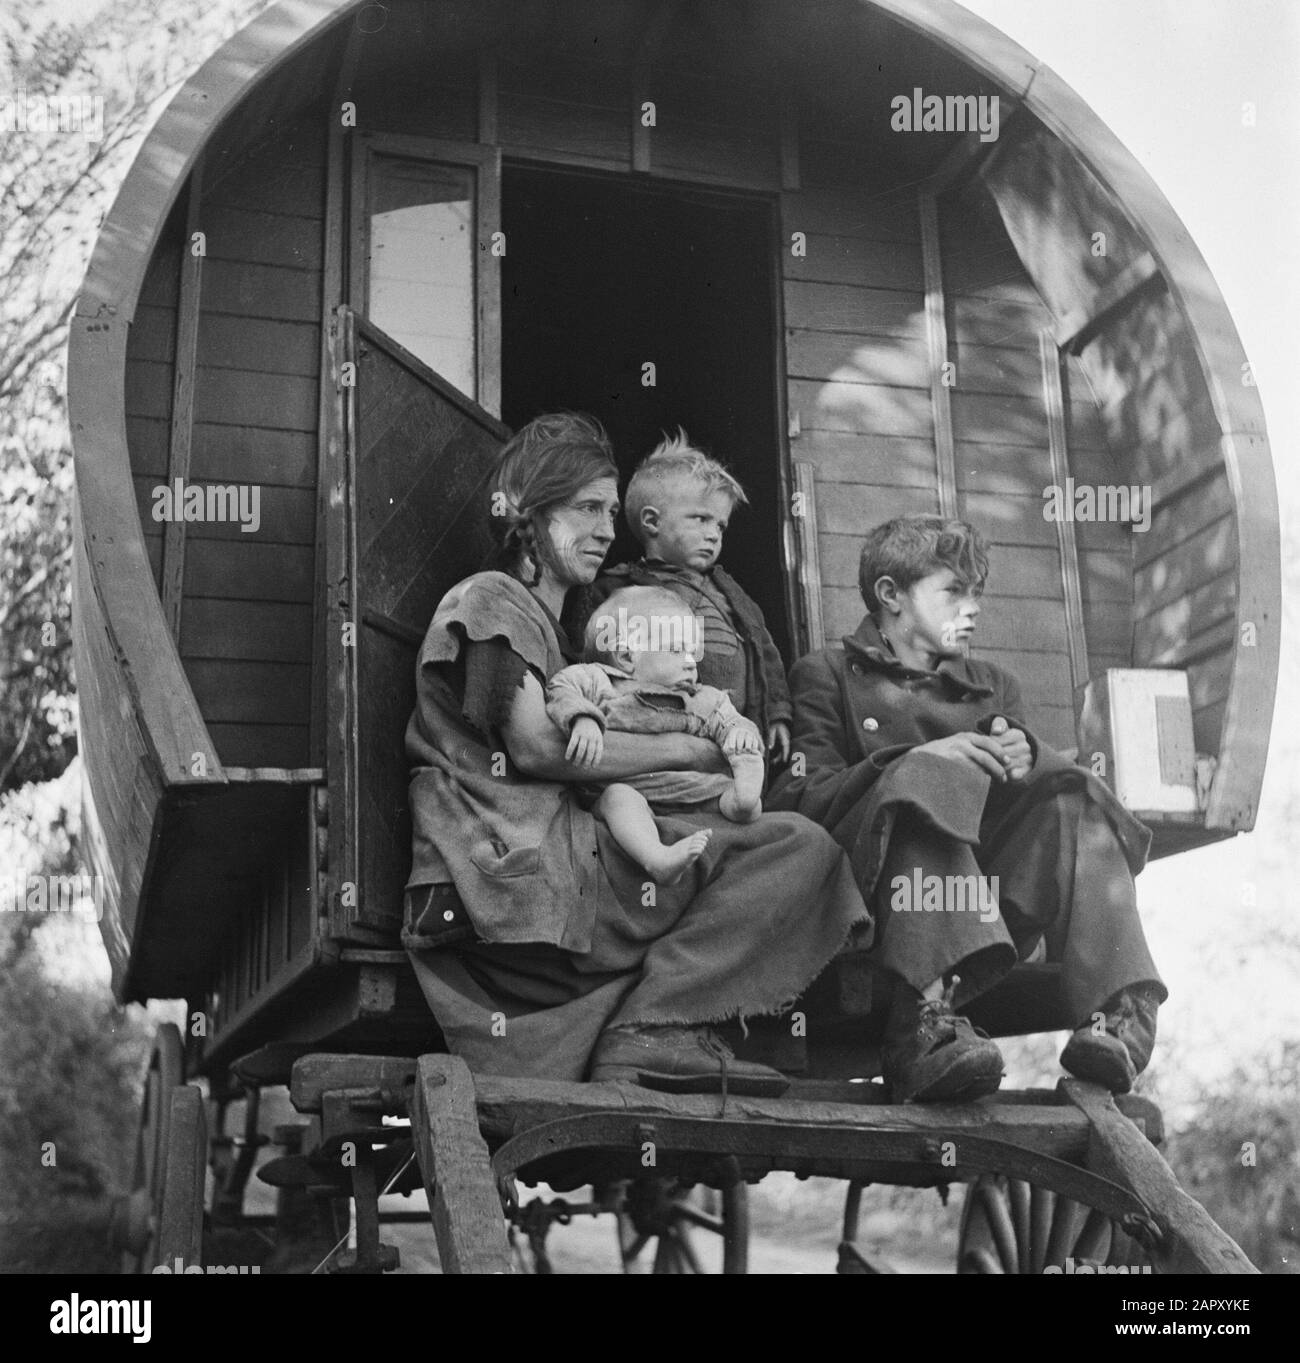 Tinkers in Ireland  Woman with children on the goat of a covered wagon Annotation: 'Tinker' is the English word for ketellapper Date: January 1, 1930 Location: Ireland Keywords: families, covered cars, Gypsies Stock Photo